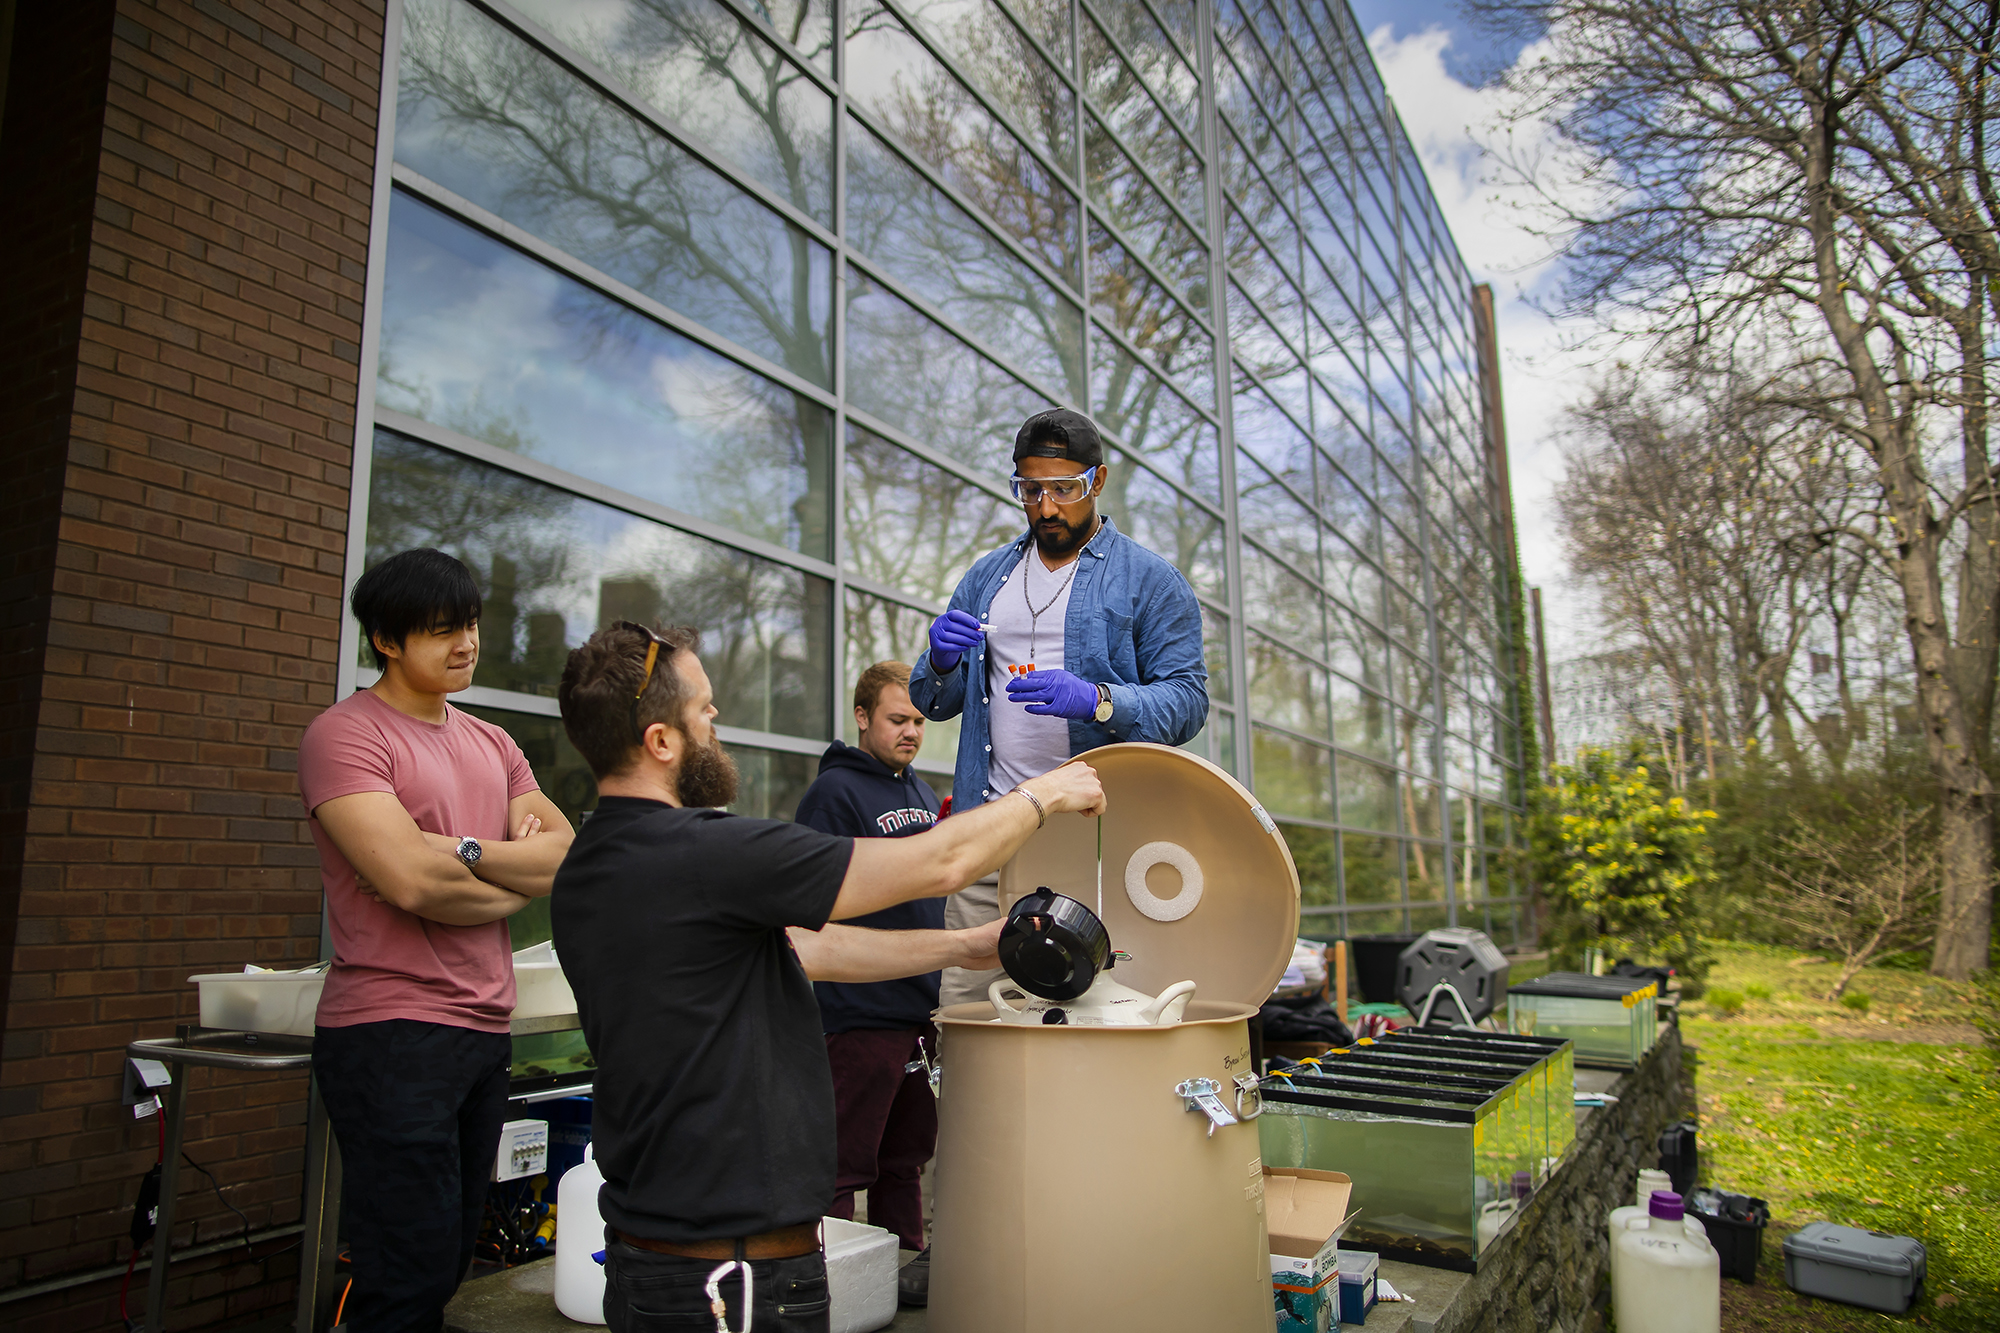 An instructor opens a large tank as students look on, one ready to place a sample inside. They are outside and the reflection of trees appears on a nearby building